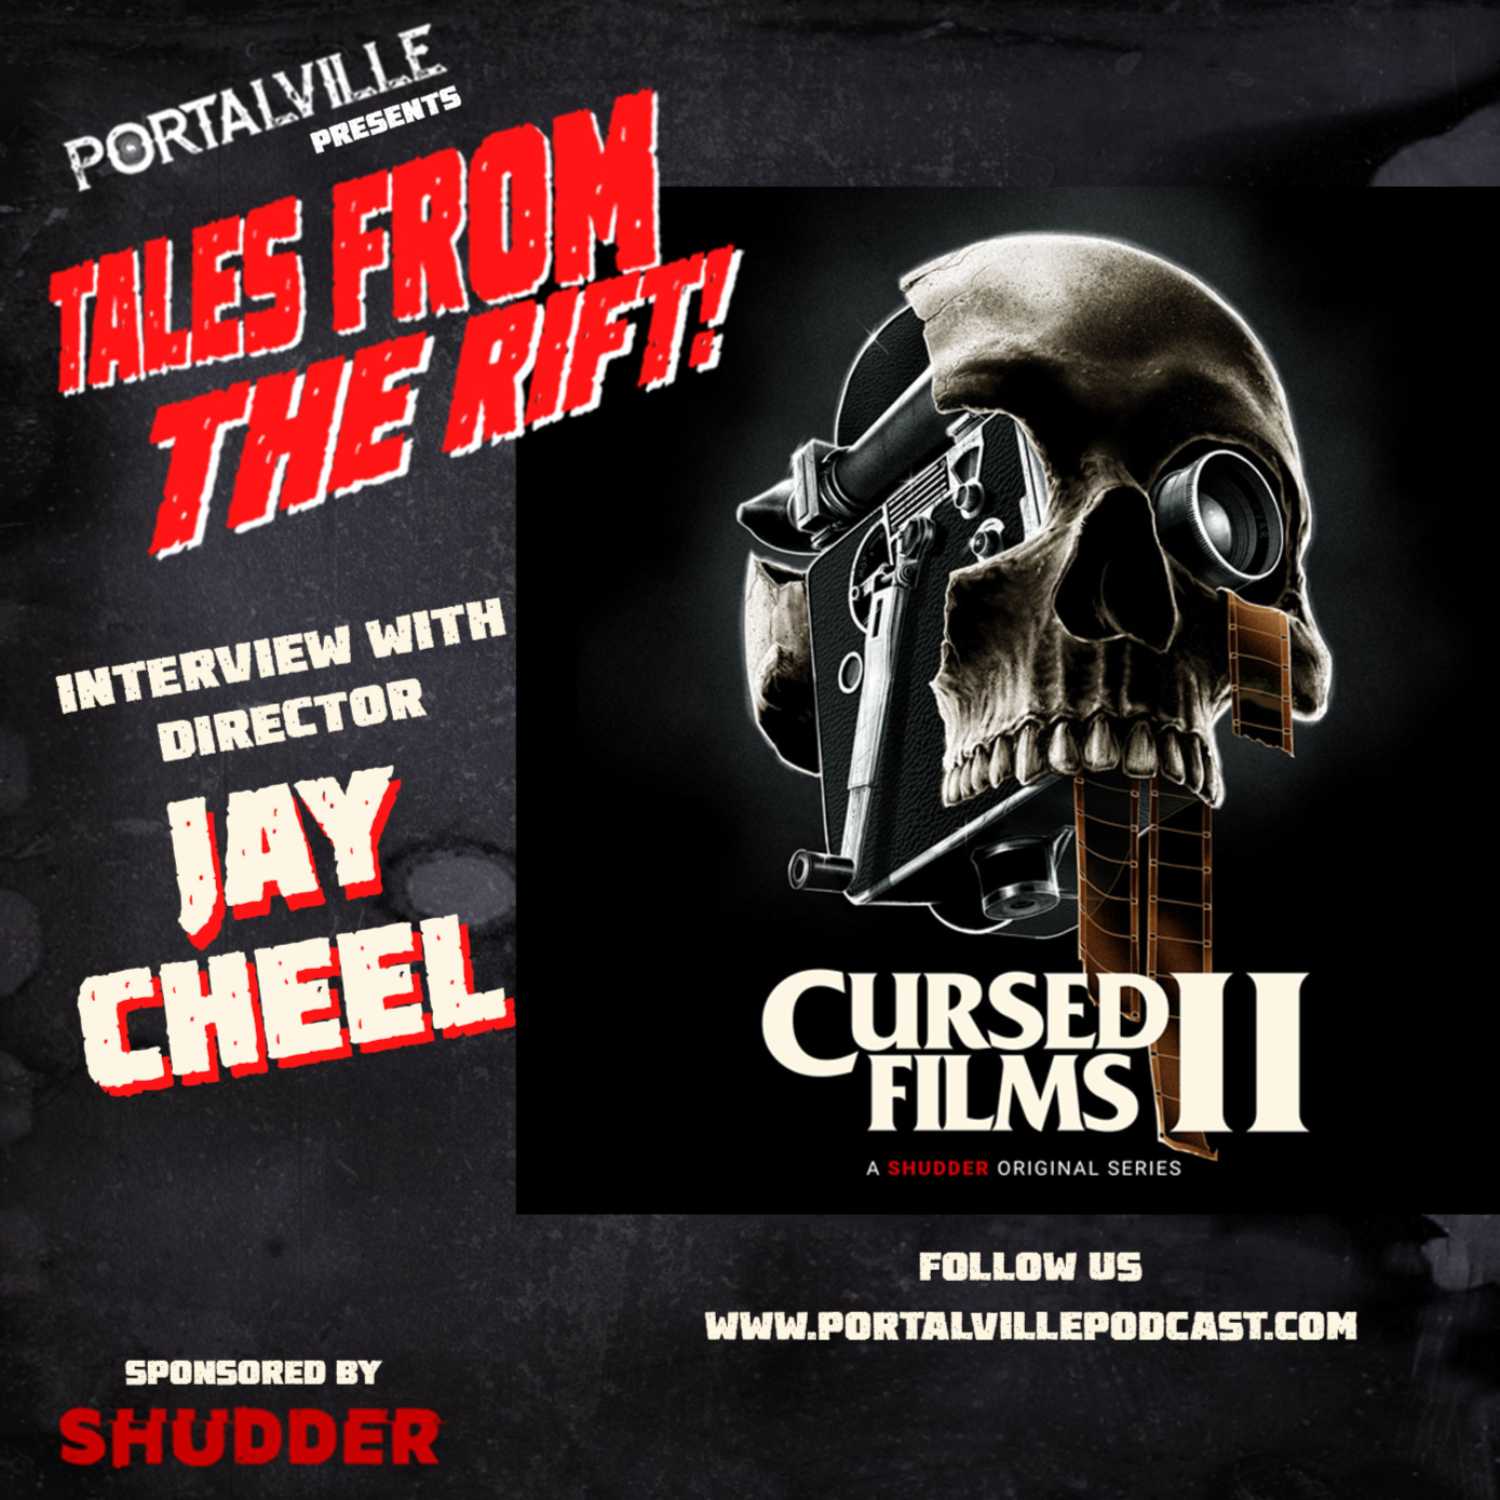 Interview with director Jay Cheel! Image